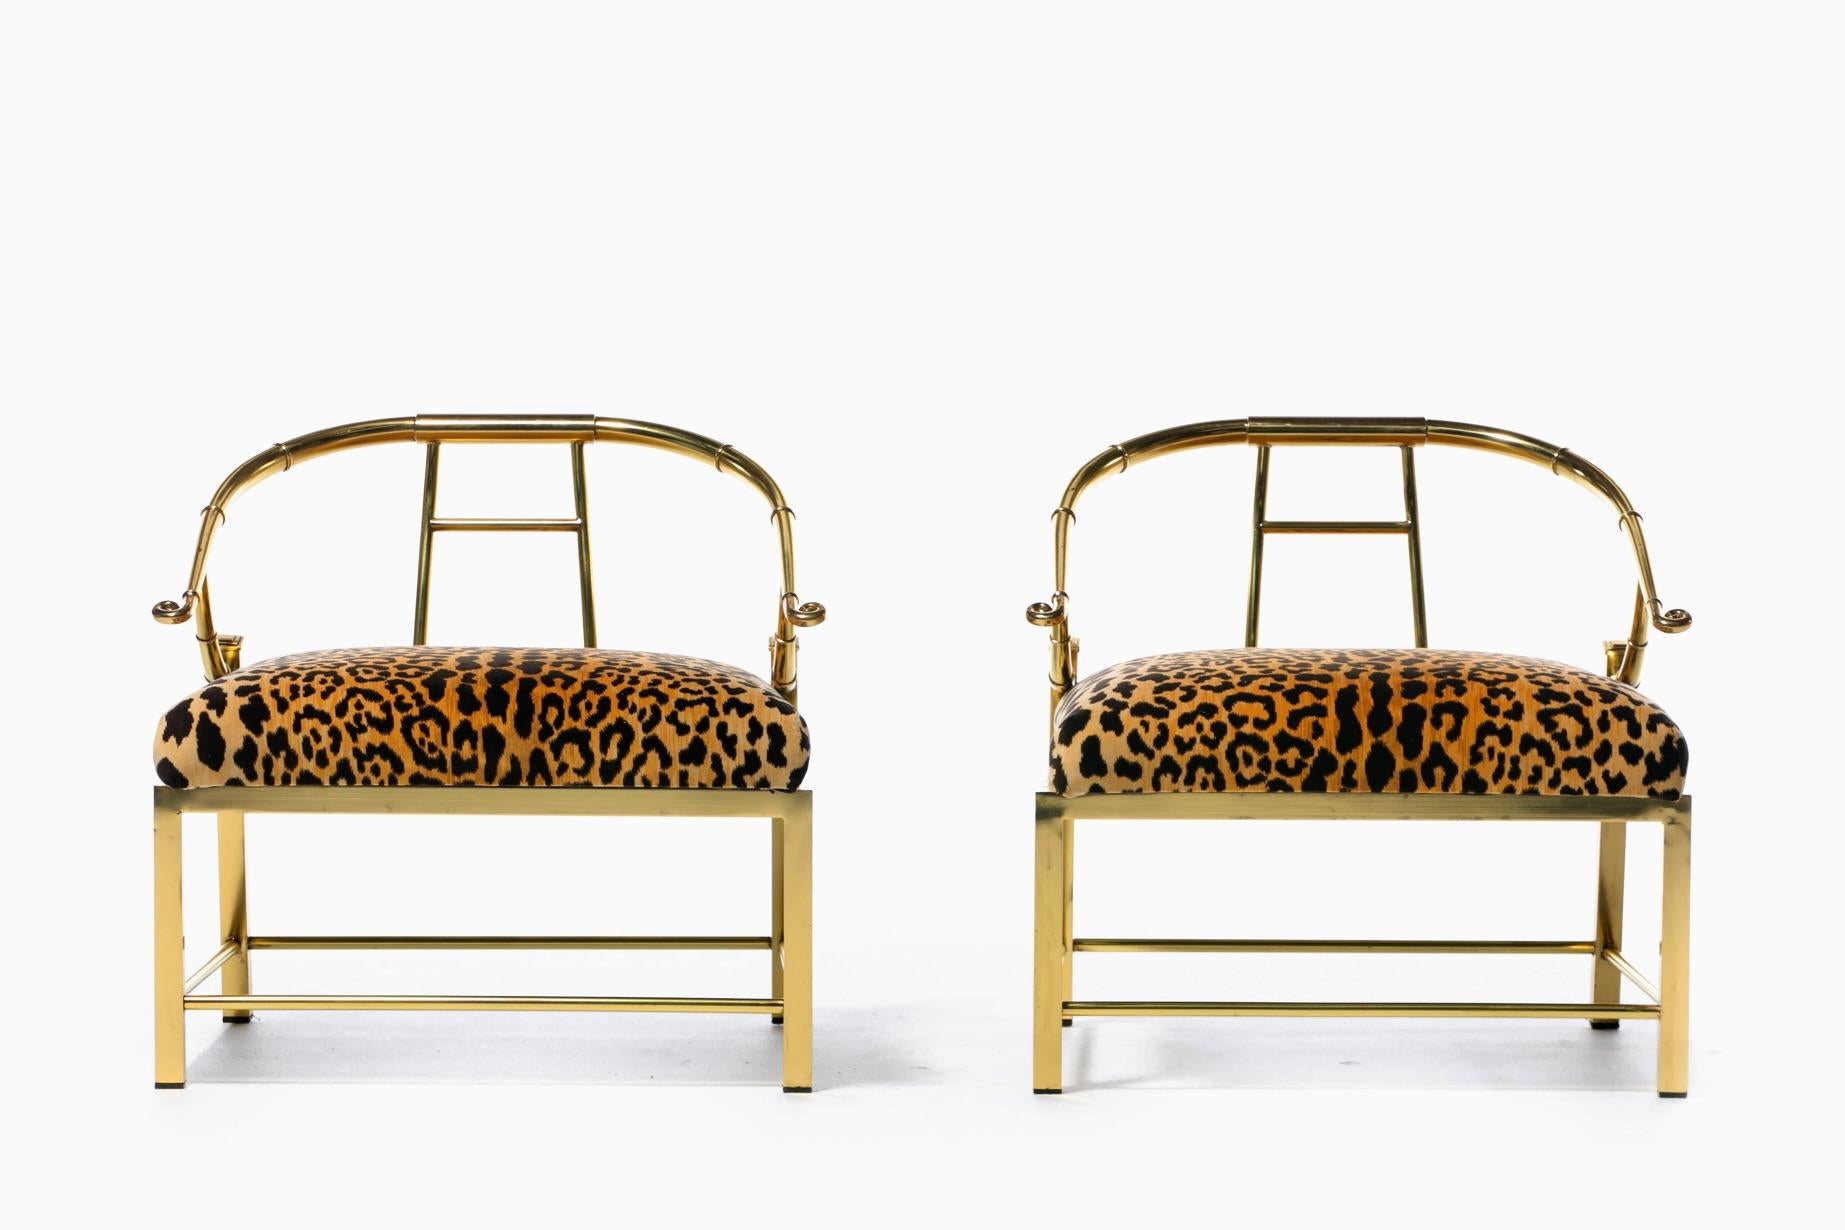 American Pair of Brass Hollywood Regency Chairs in Leopard Velvet by Mastercraft C. 1960s